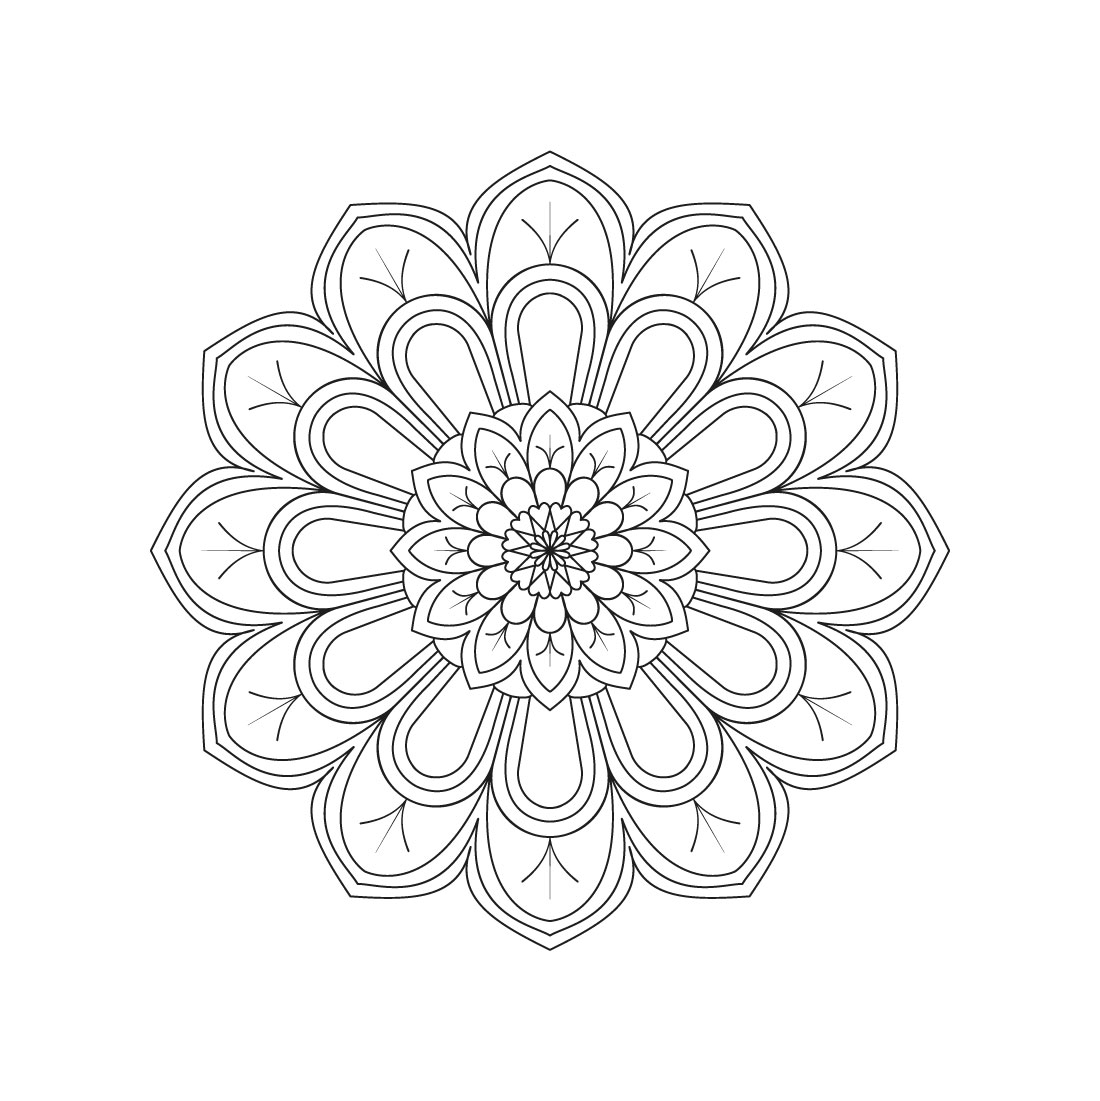 bundle of 10 blossoming beauty mandala coloring book pages 08 103